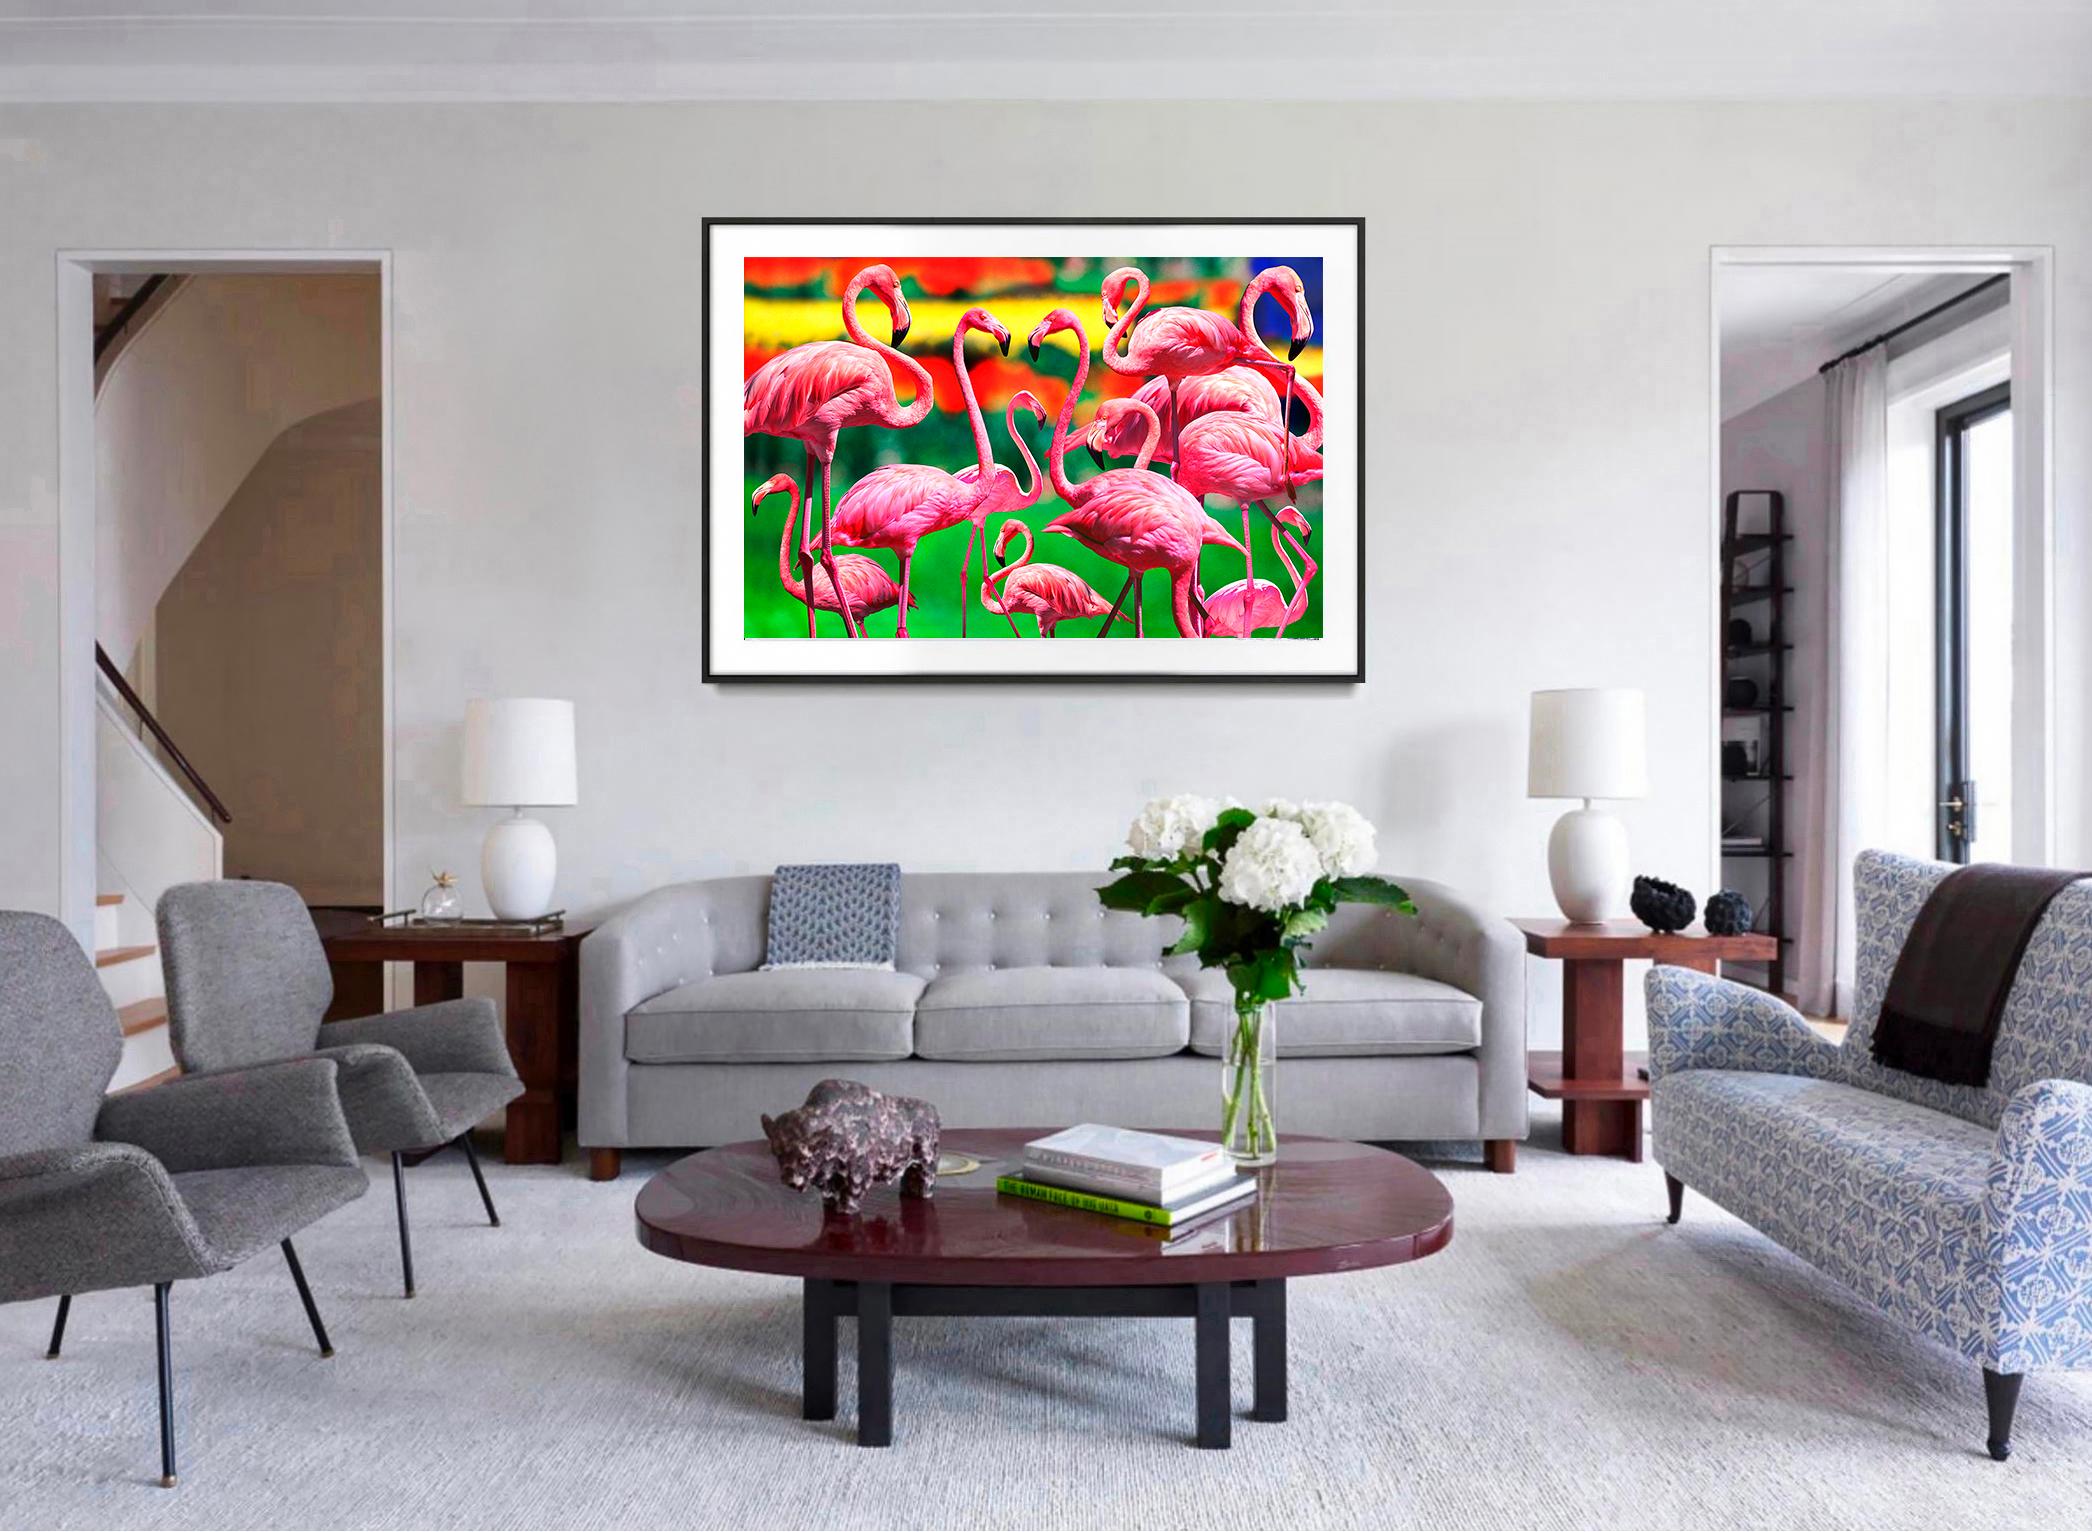 Pink Flamingos Socializing with a Colorful Background - Impressionist Photograph by Mitchell Funk